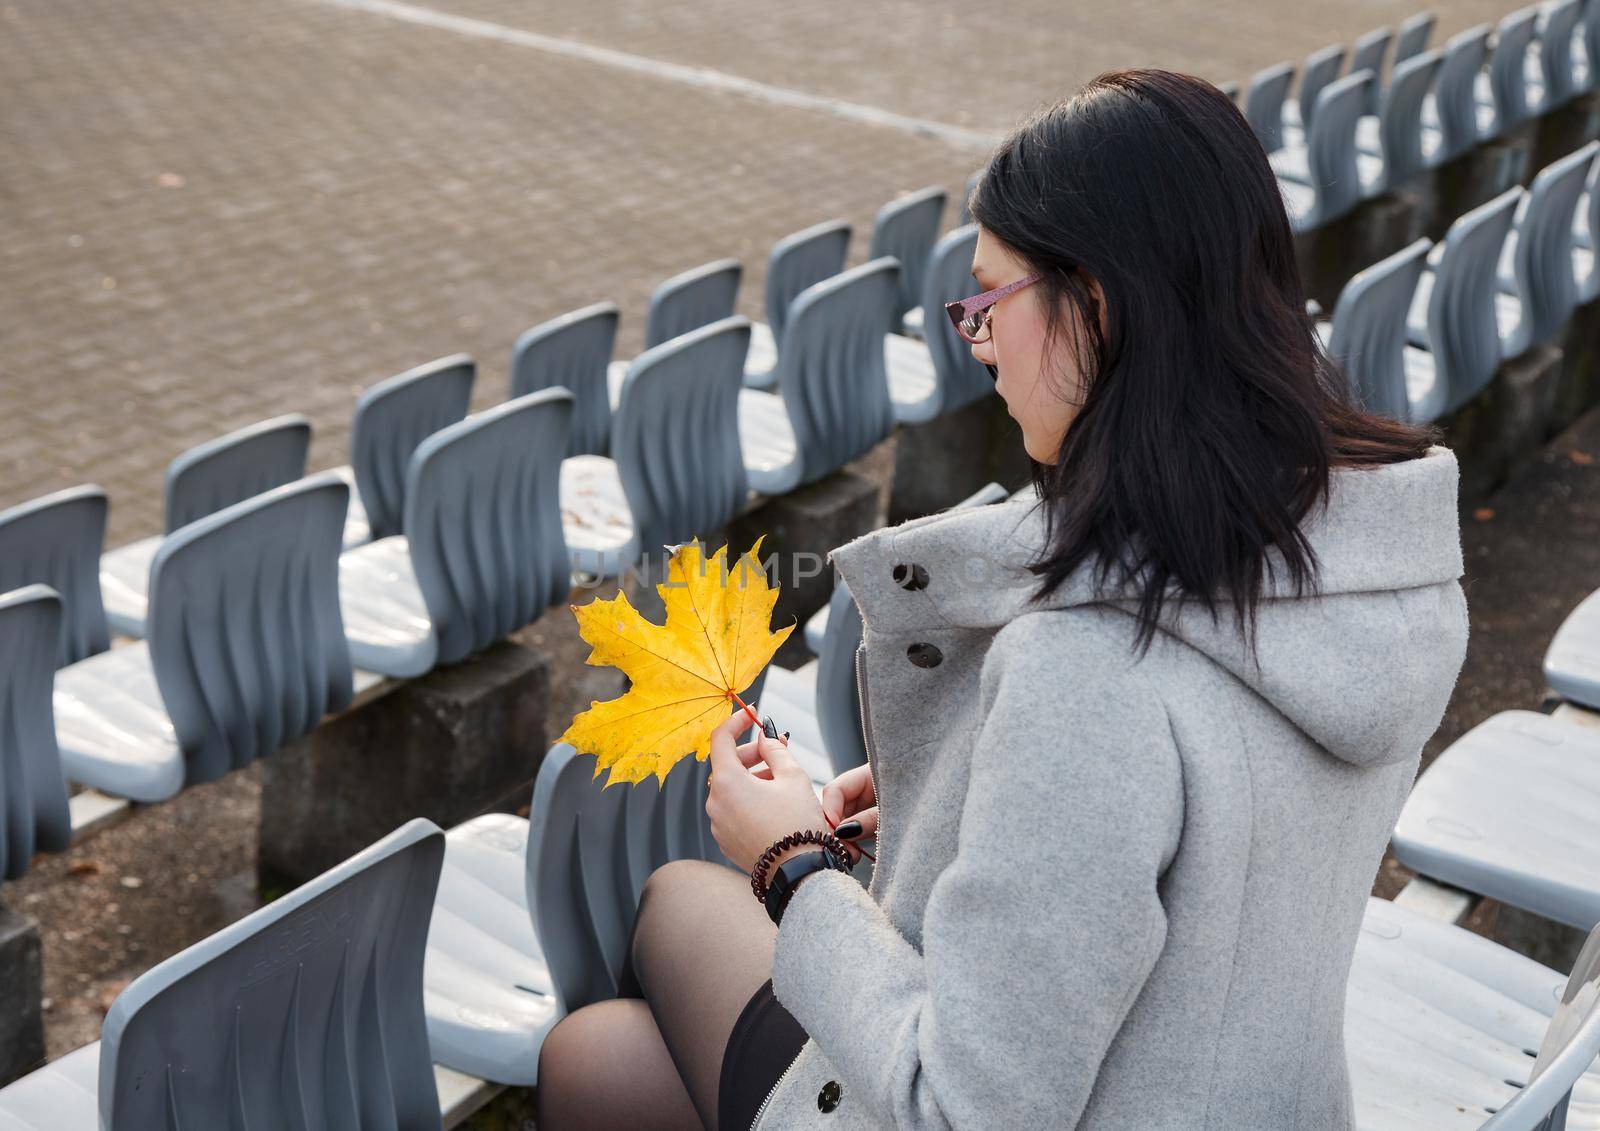 lonely young girl in a gray coat sitting on a seat of an empty stadium on autumn day